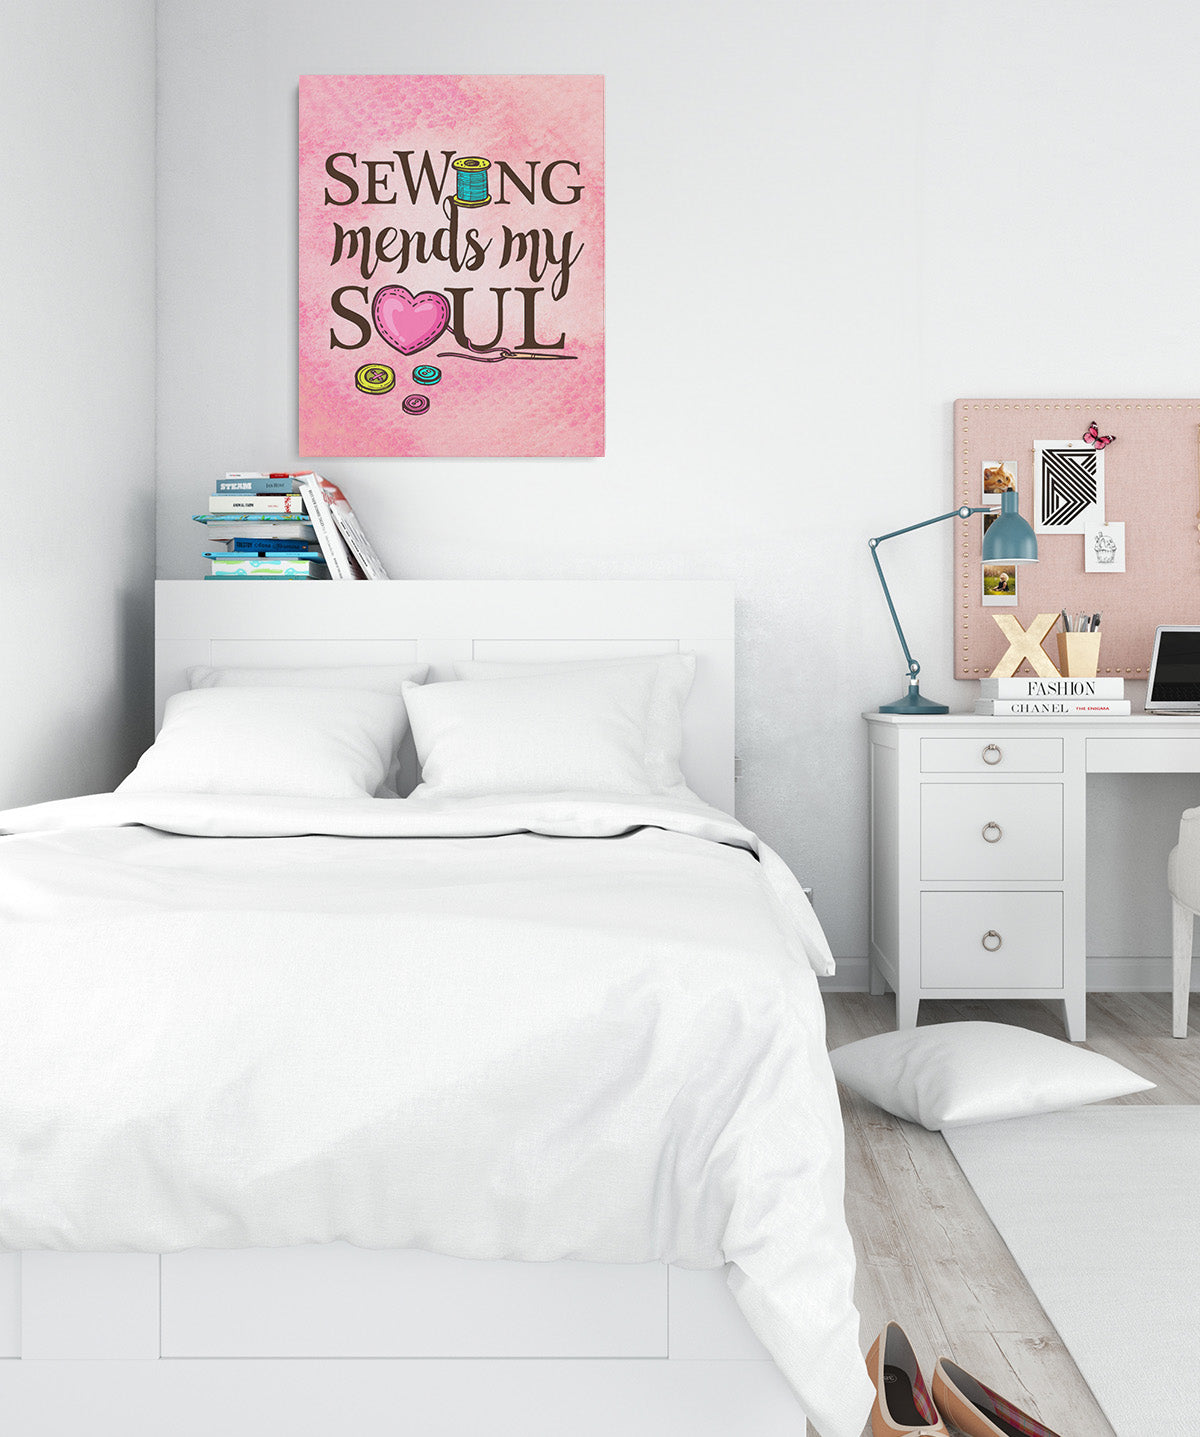 Sewing Mends My Soul - Sewing Wall Art Decor Print with a pink background - Poster & Canvas Sizes